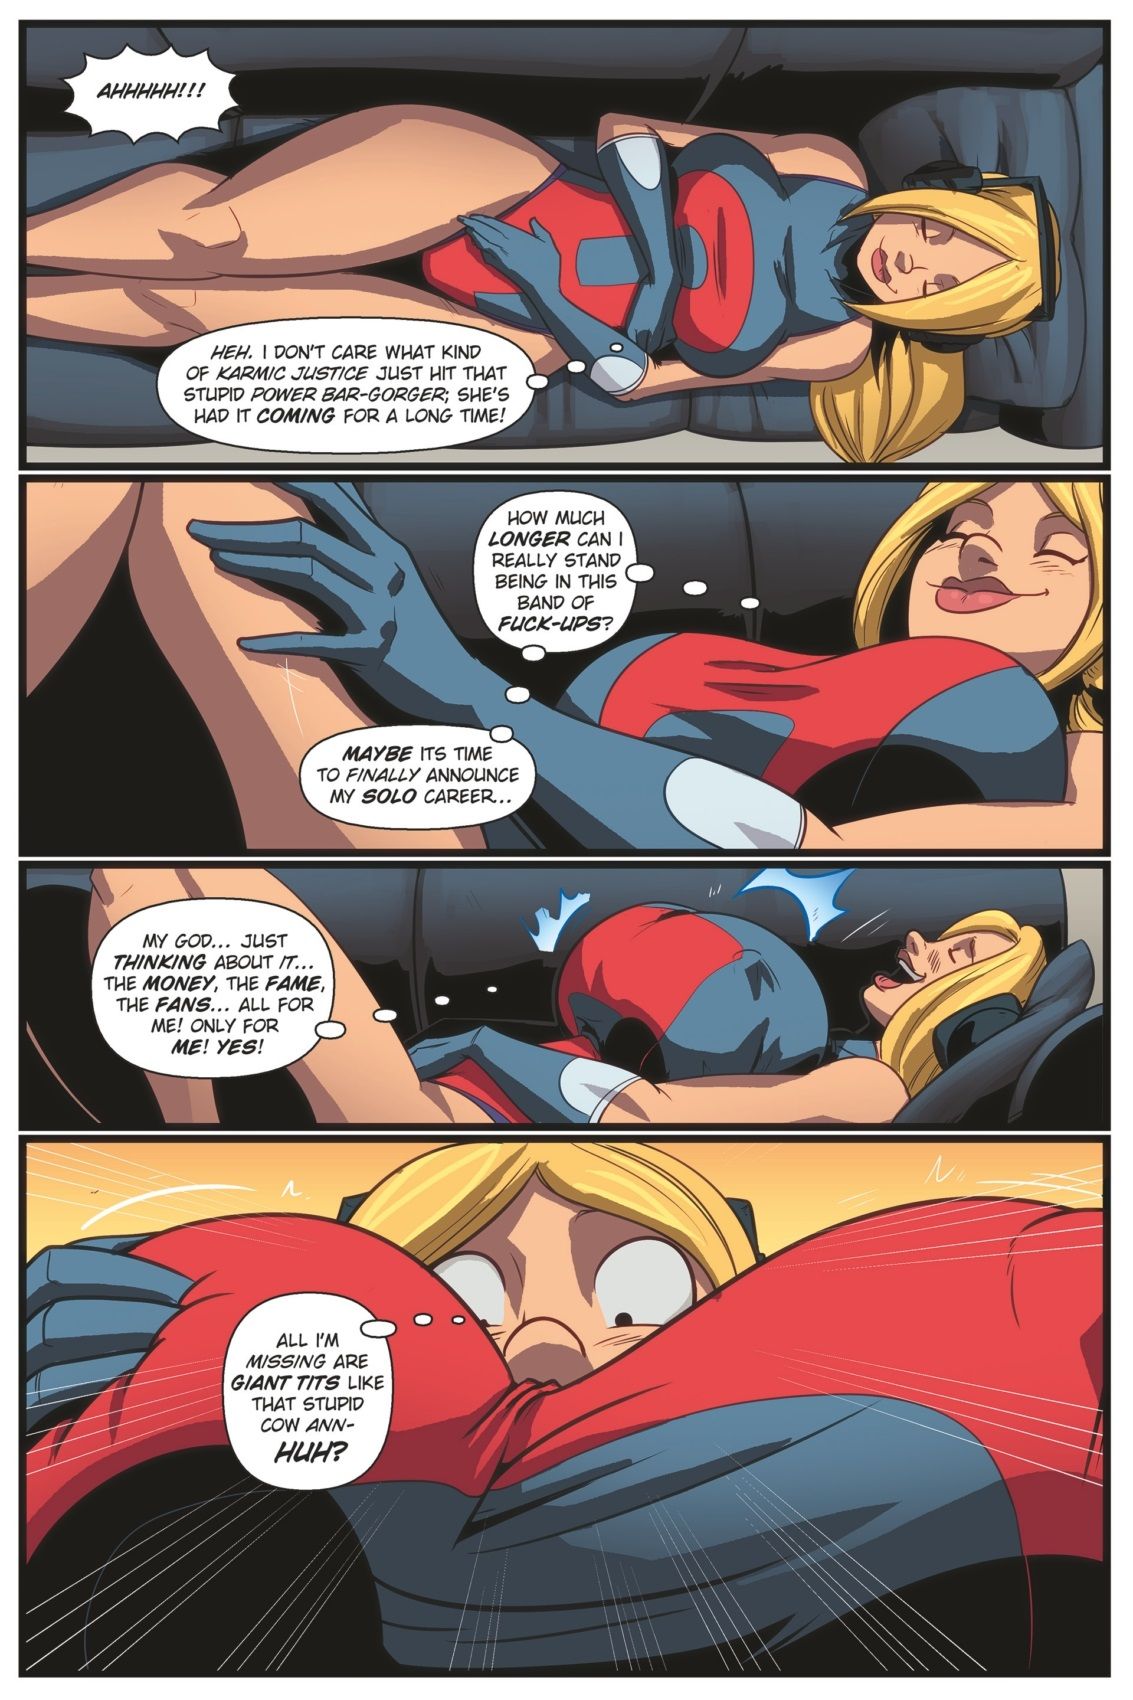 Annie and the Blow-Up Dolls 2 by ExpansionFan page 8